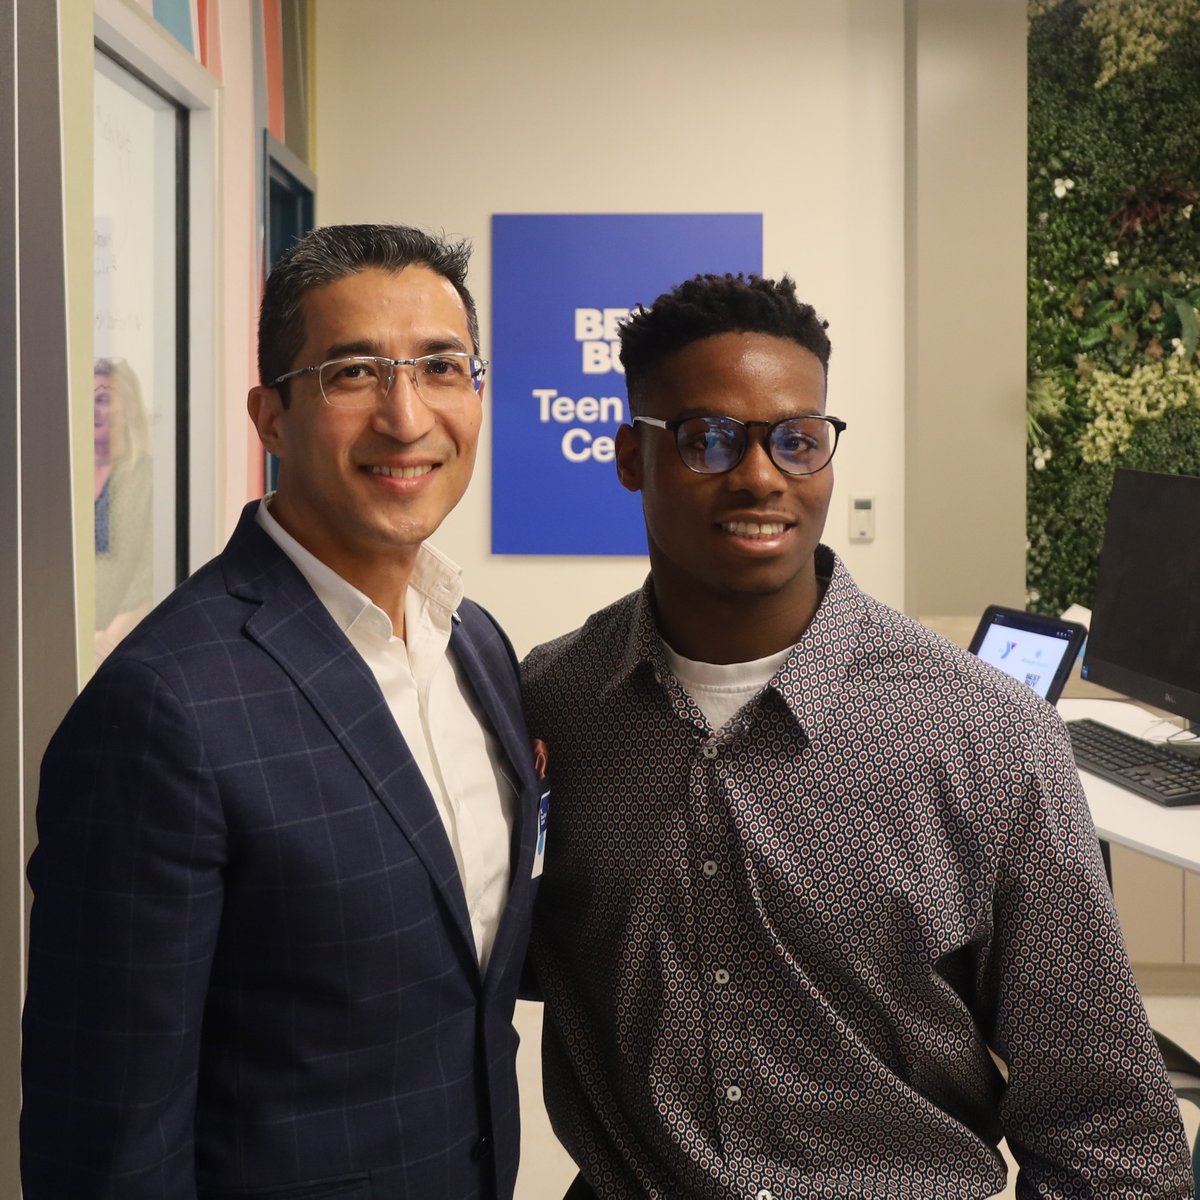 Two days ago, I had the pleasure of meeting @RasuShrestha at the @ymca Teen Tech Center created by @BestBuy. It was an amazing opportunity to meet so many industry-leading businessmen.